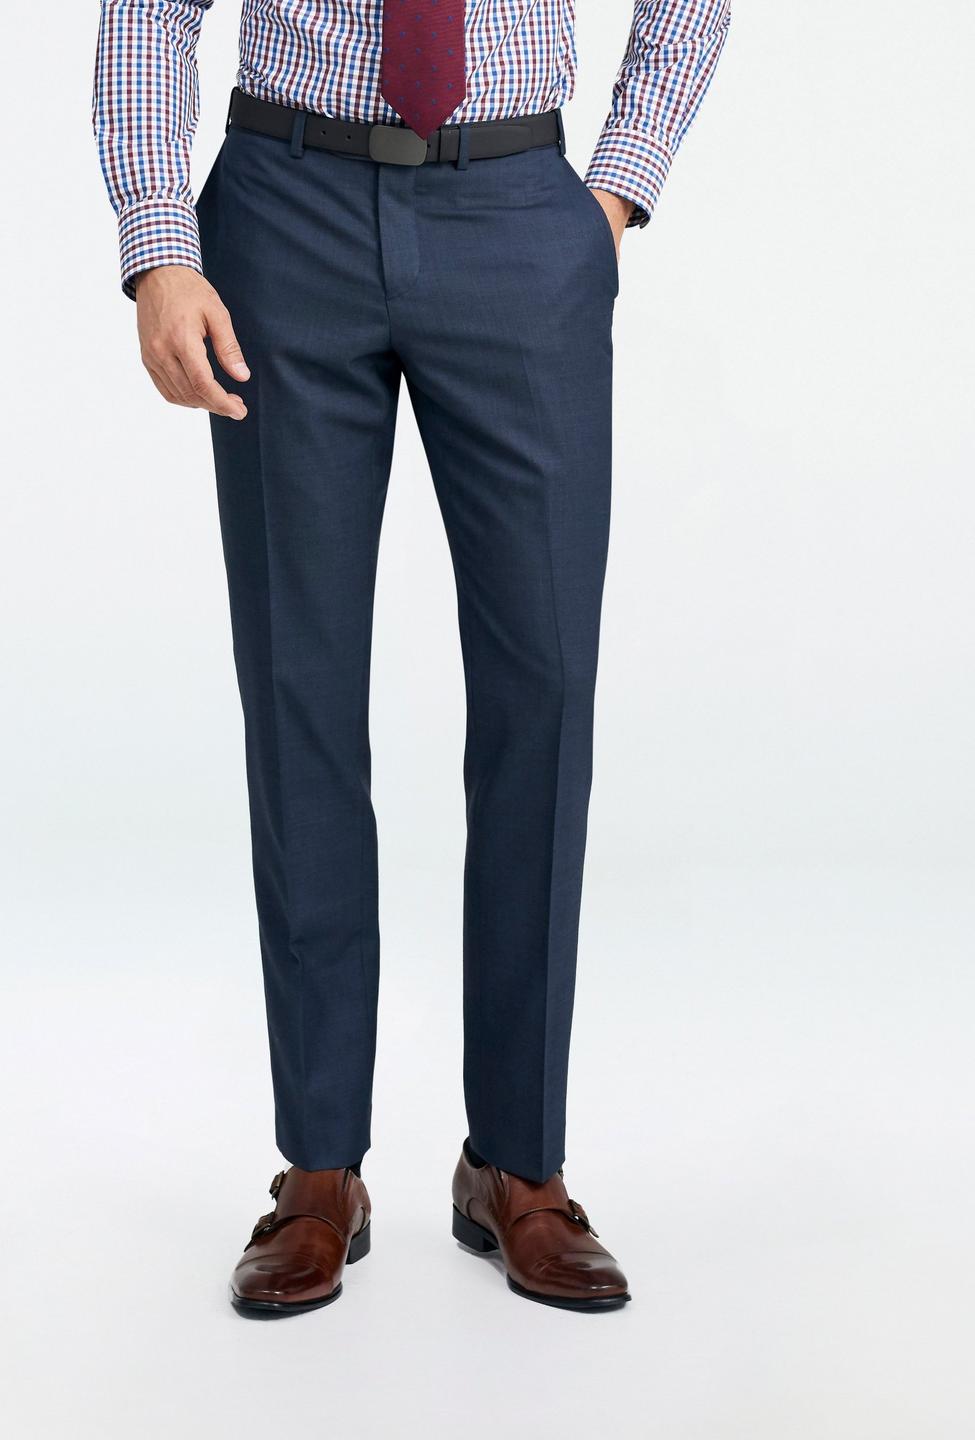 Blue pants - Hayle Solid Design from Premium Indochino Collection